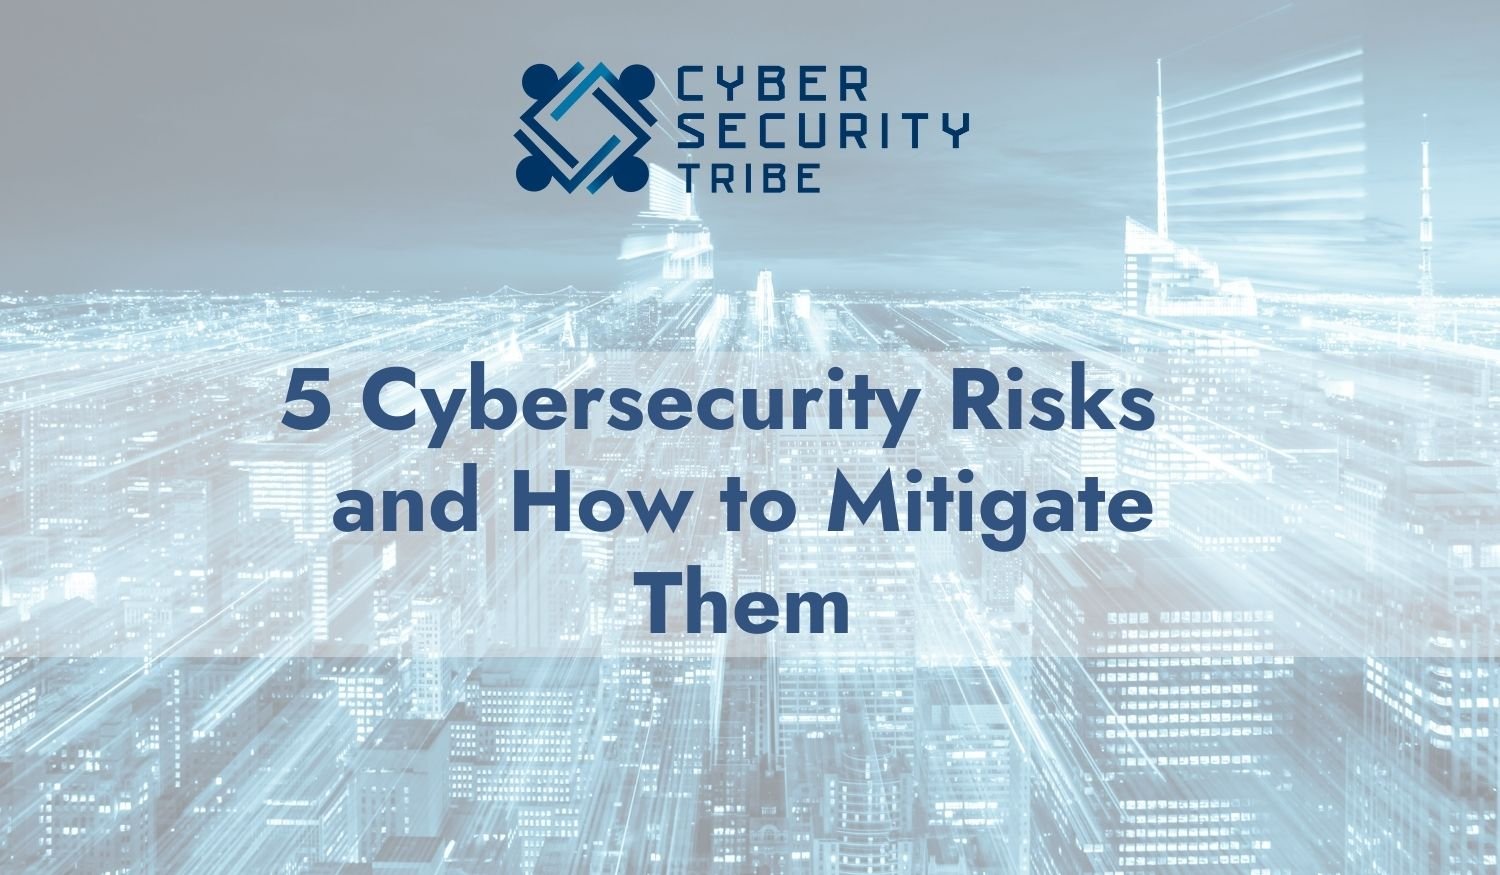 5 Cybersecurity Risks and How to Mitigate Them (1500 × 875 px)